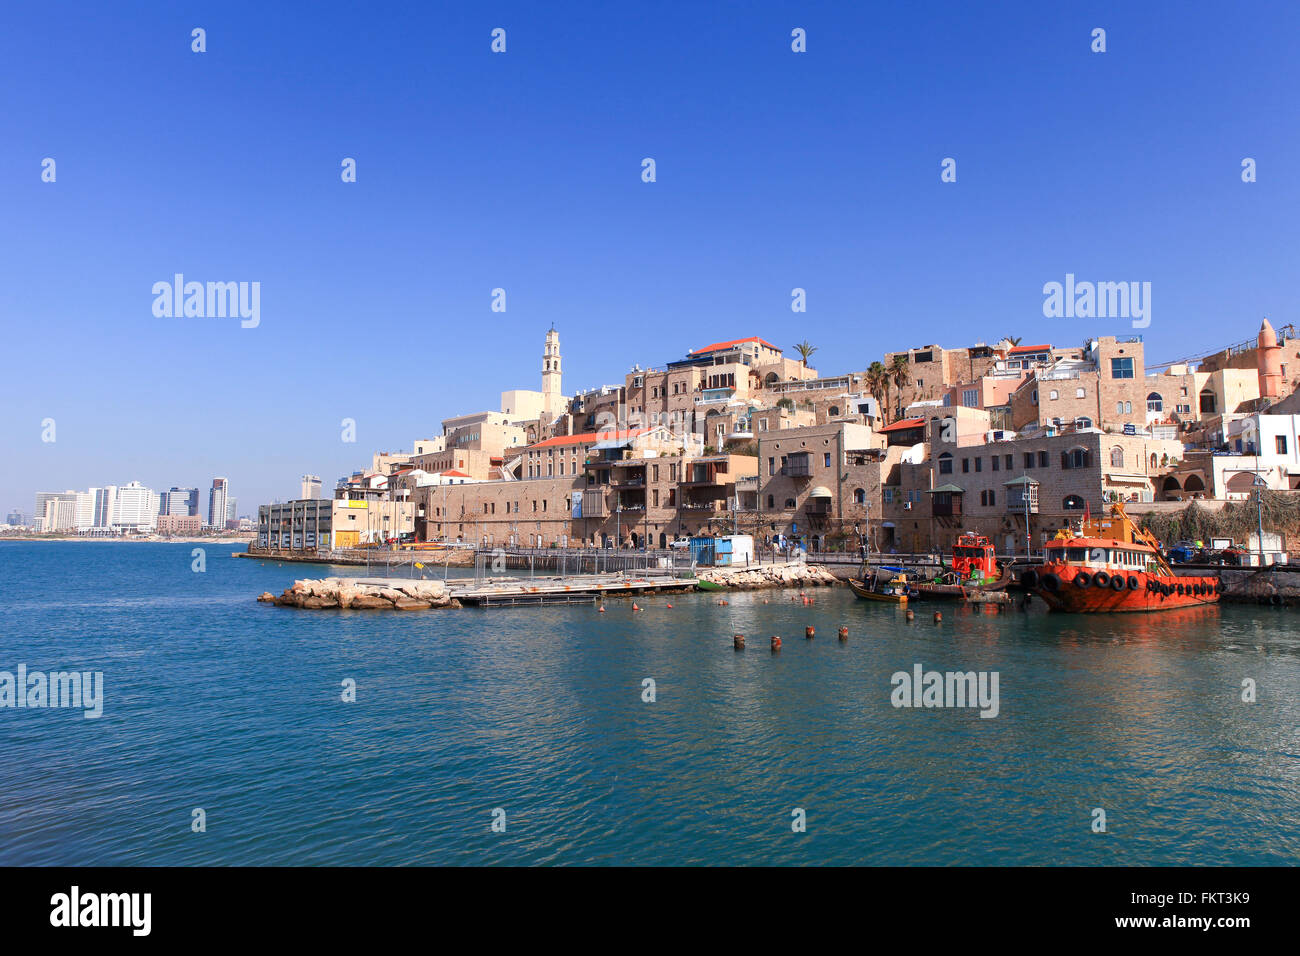 Old port of Jaffa with Tel Aviv's skyline in the background Stock Photo